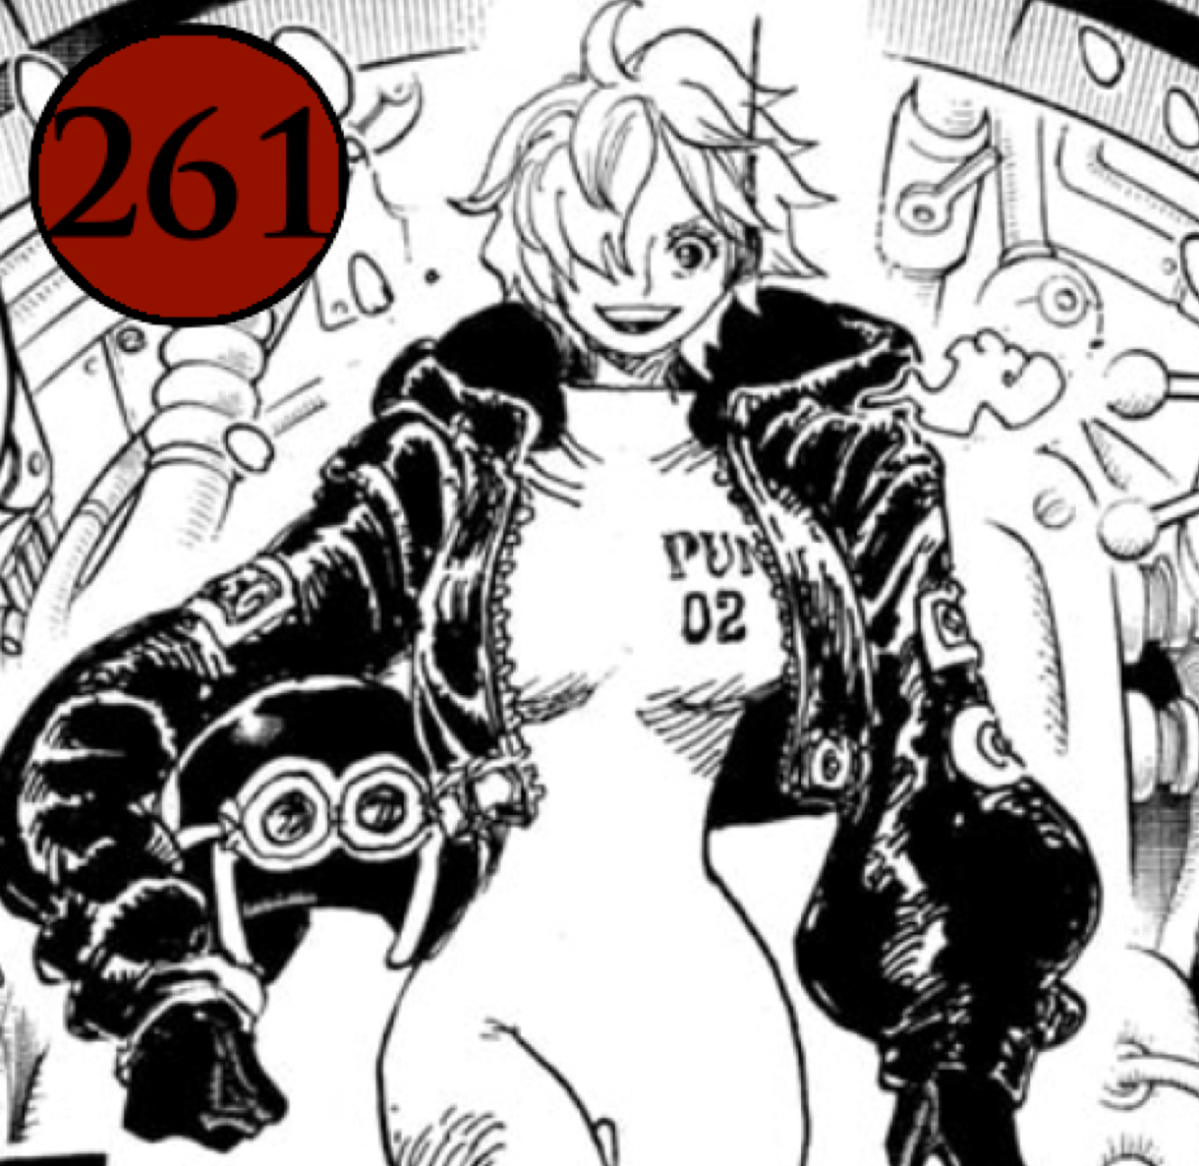 One piece chapter 1061 spoiler english!